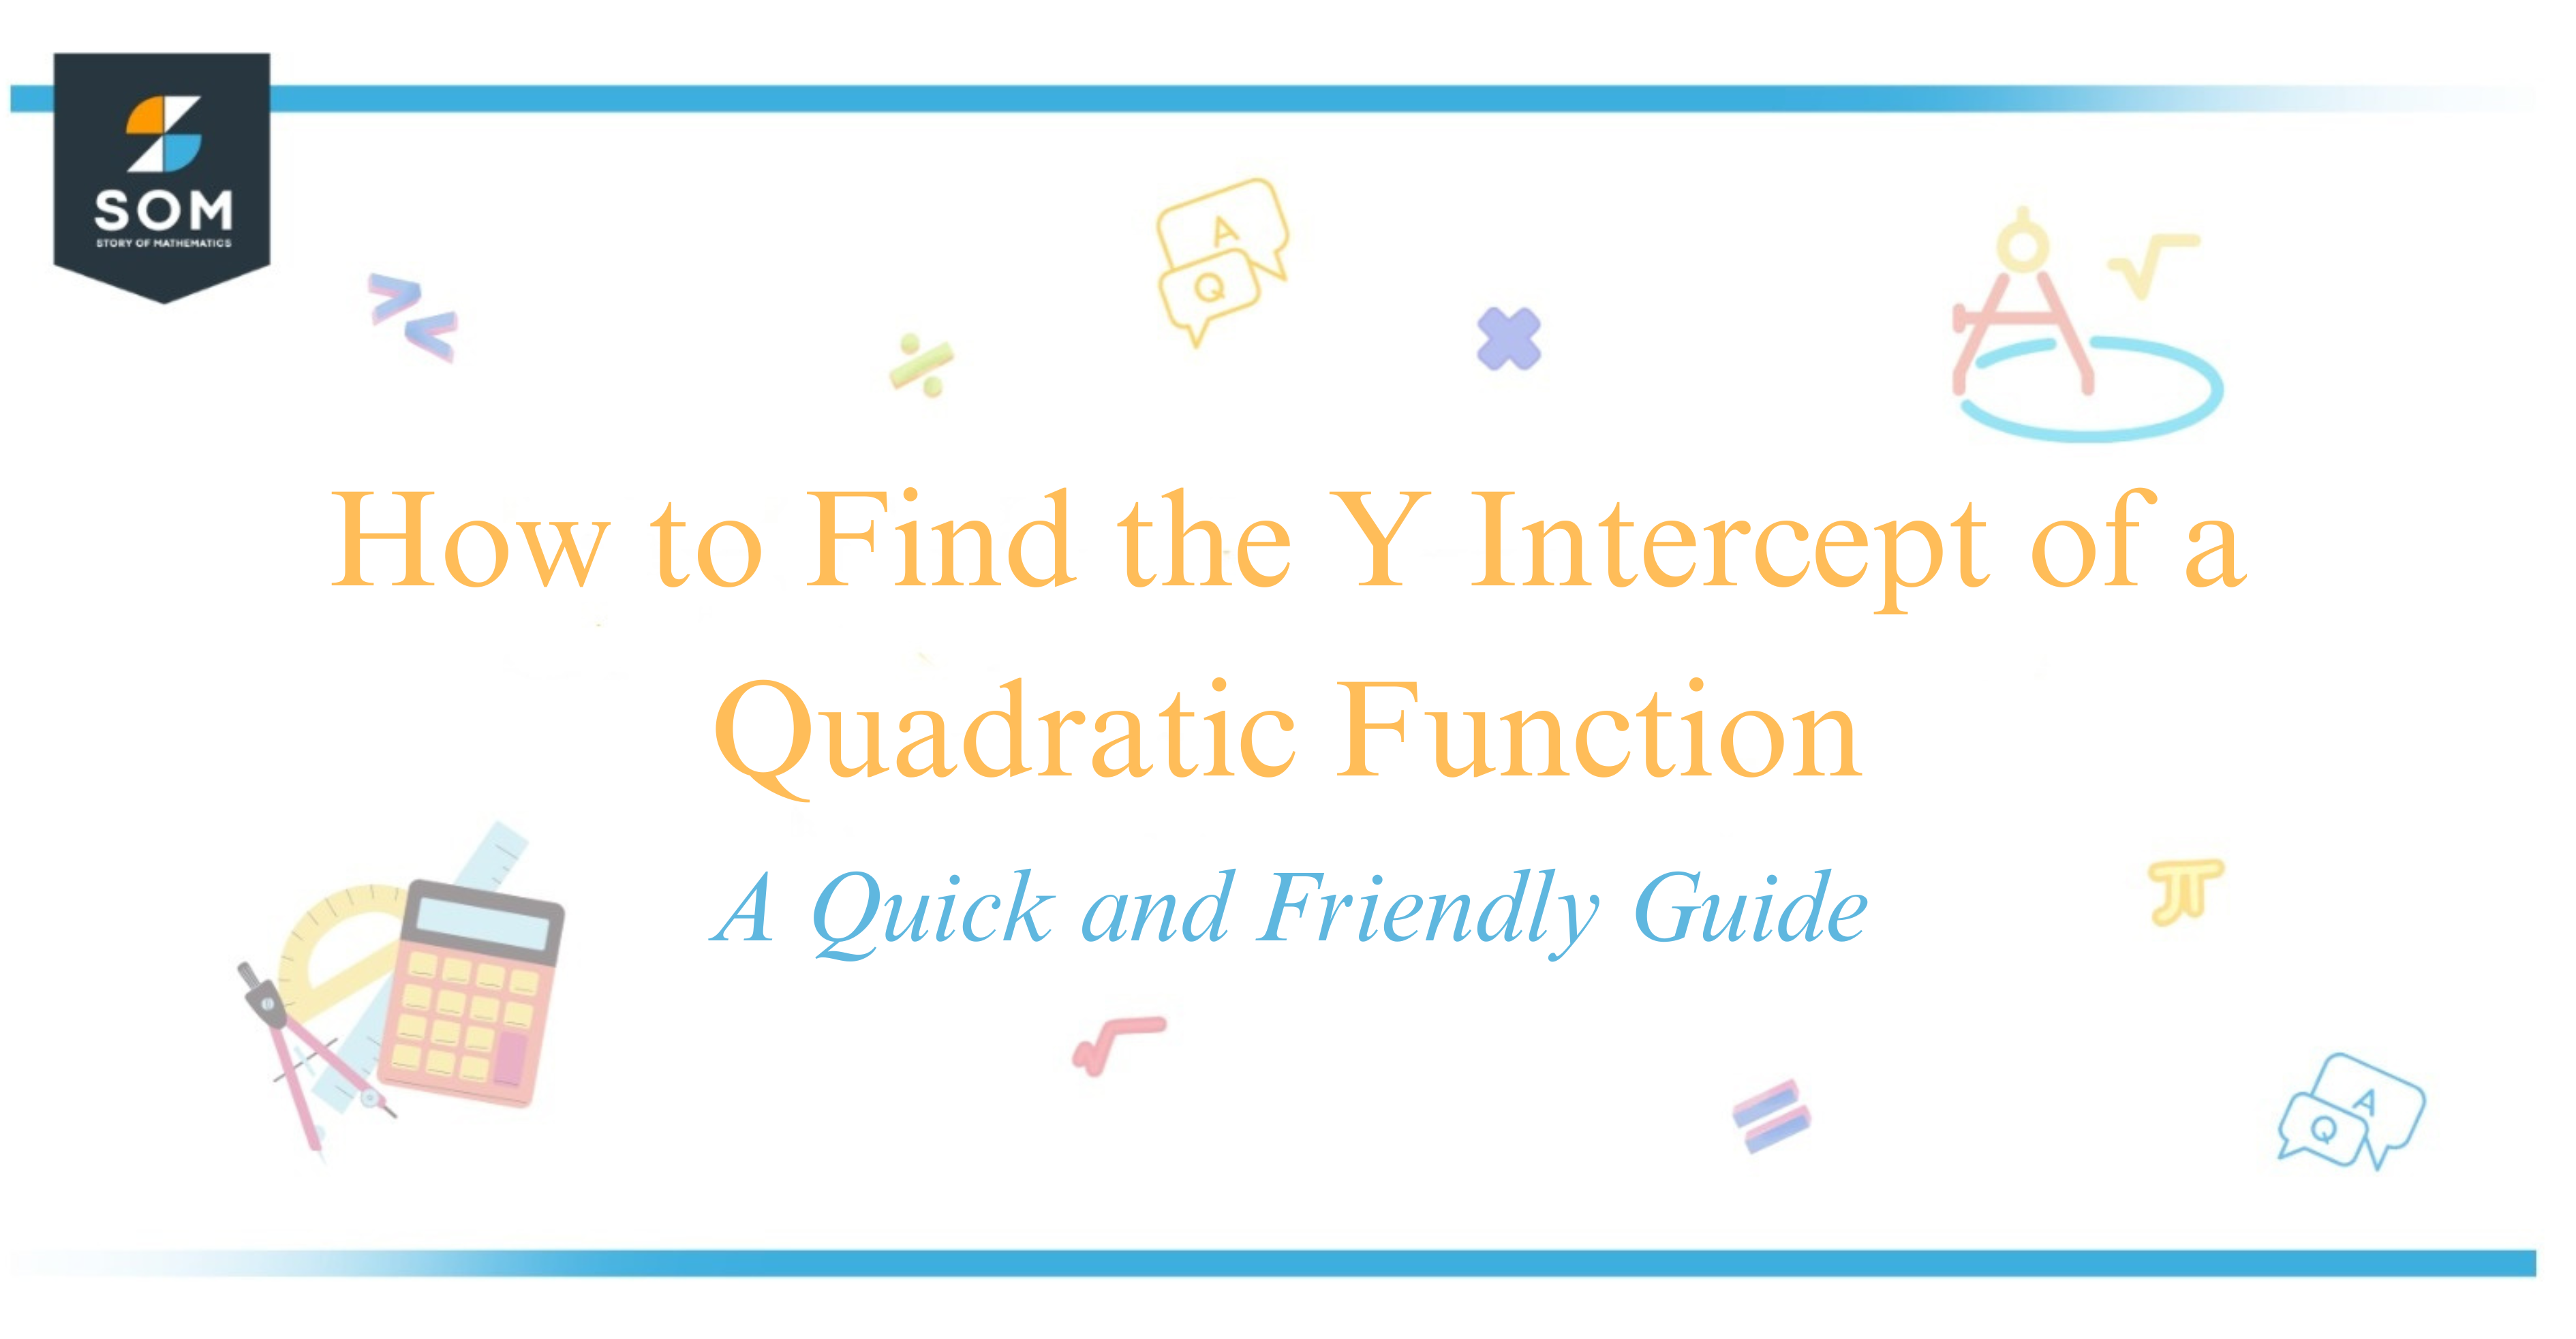 How to Find the Y Intercept of a Quadratic Function A Quick and Friendly Guide